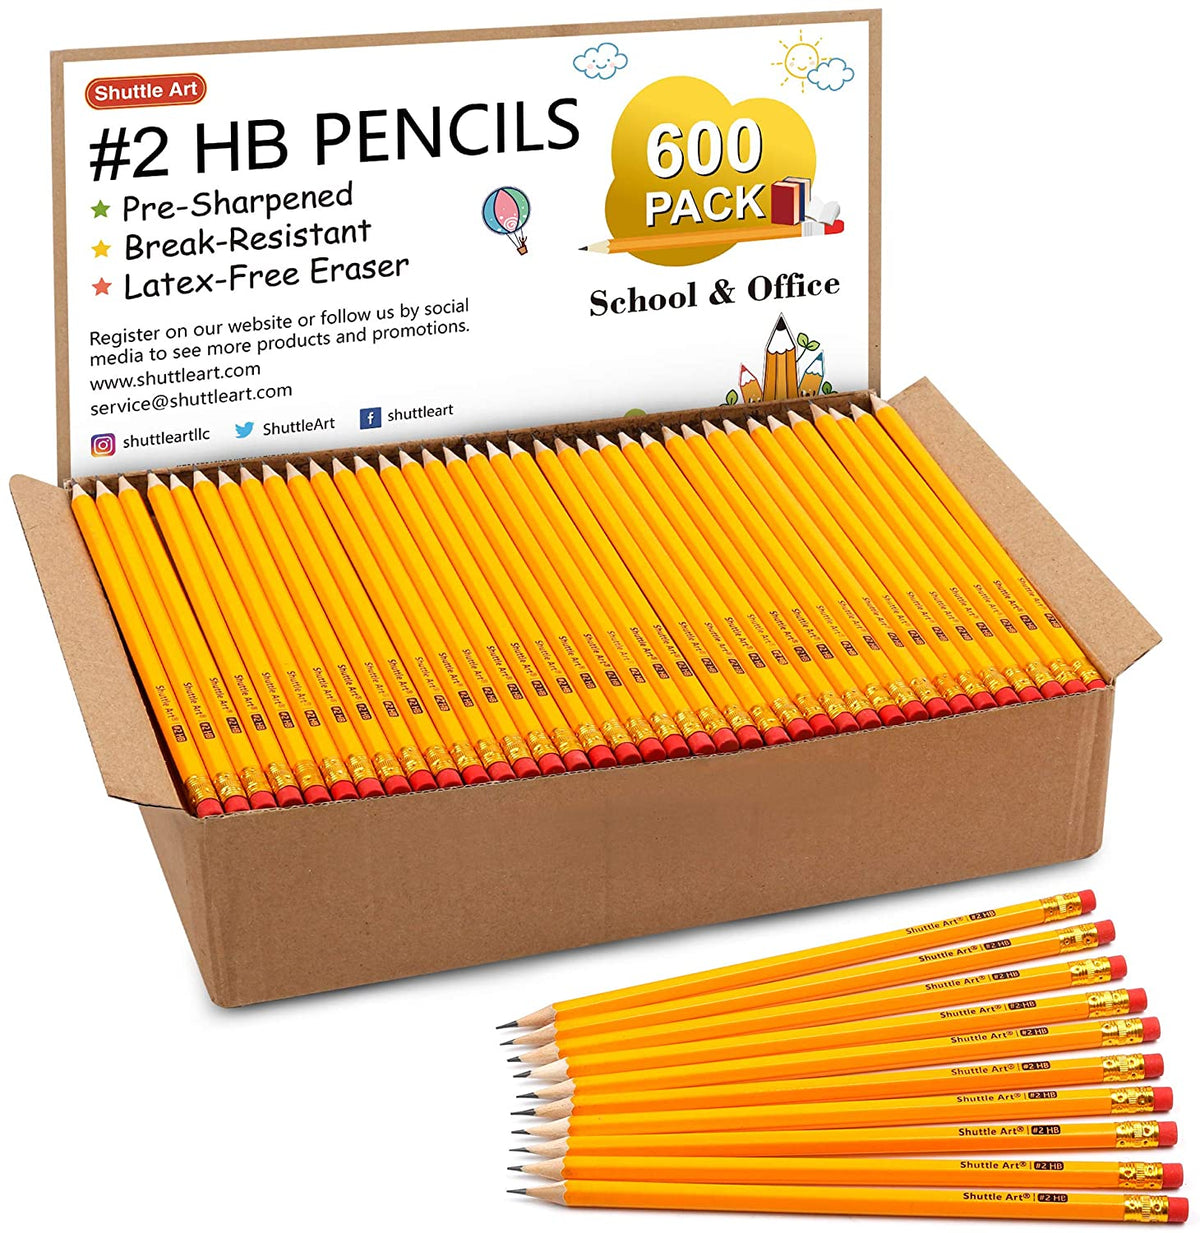 Shuttle Art Sketch Pencils Drawing Tools 52 Pack for Drafting